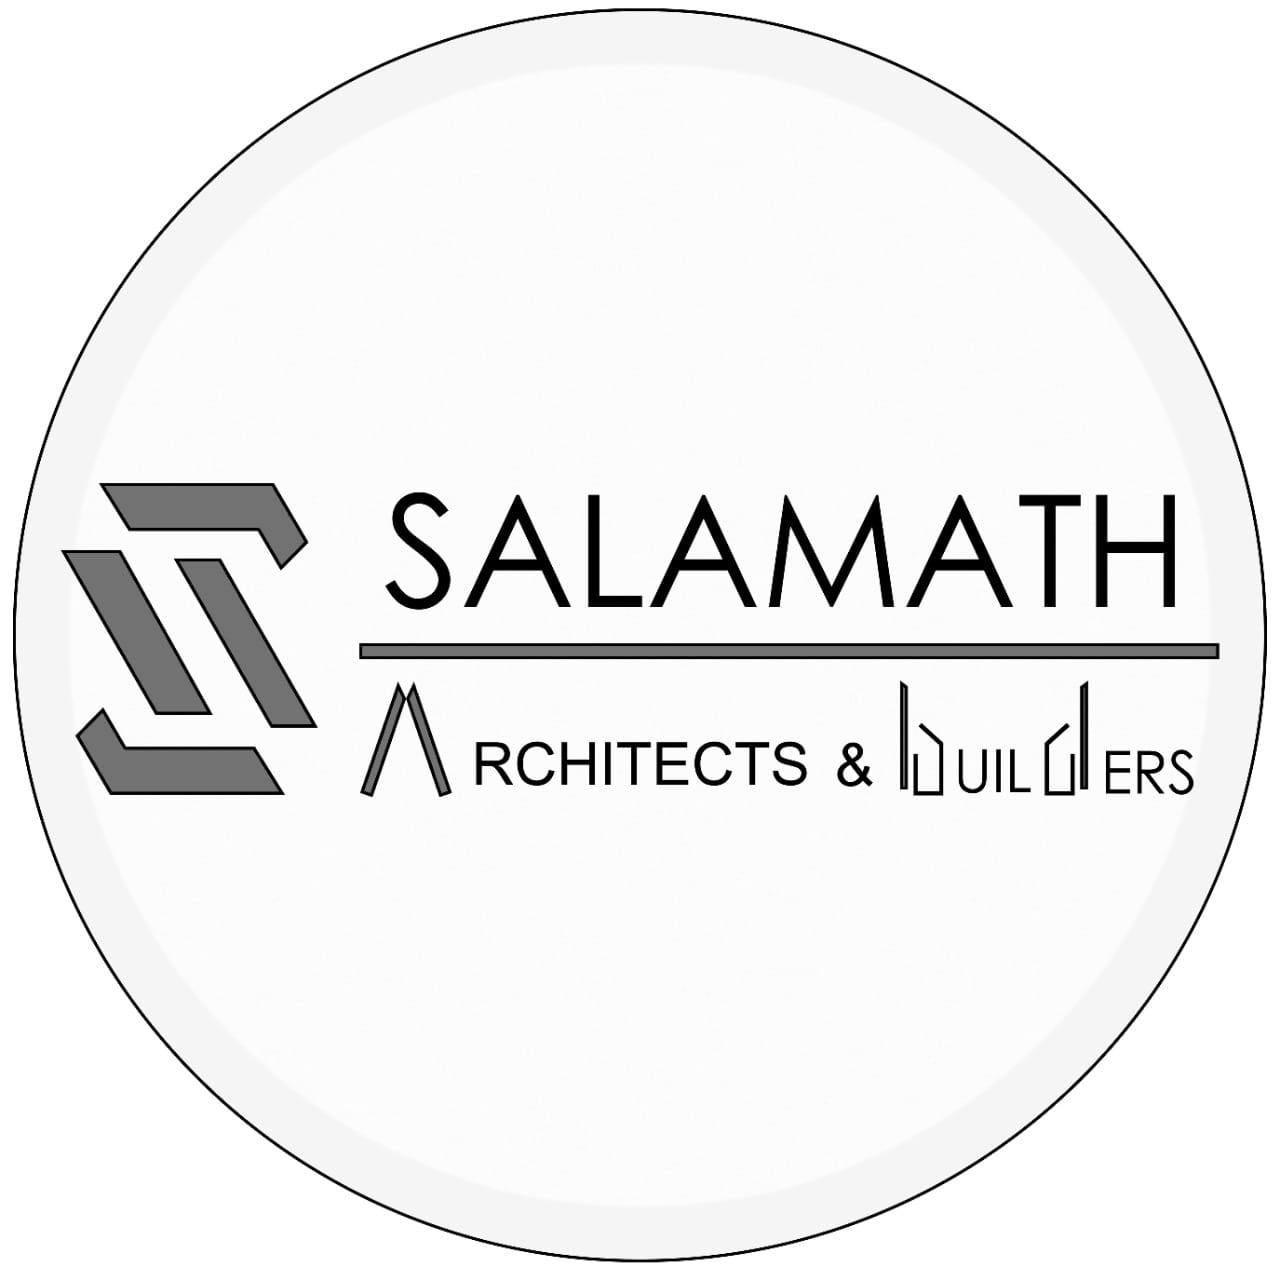 Salamath Architects and Builders|Architect|Professional Services